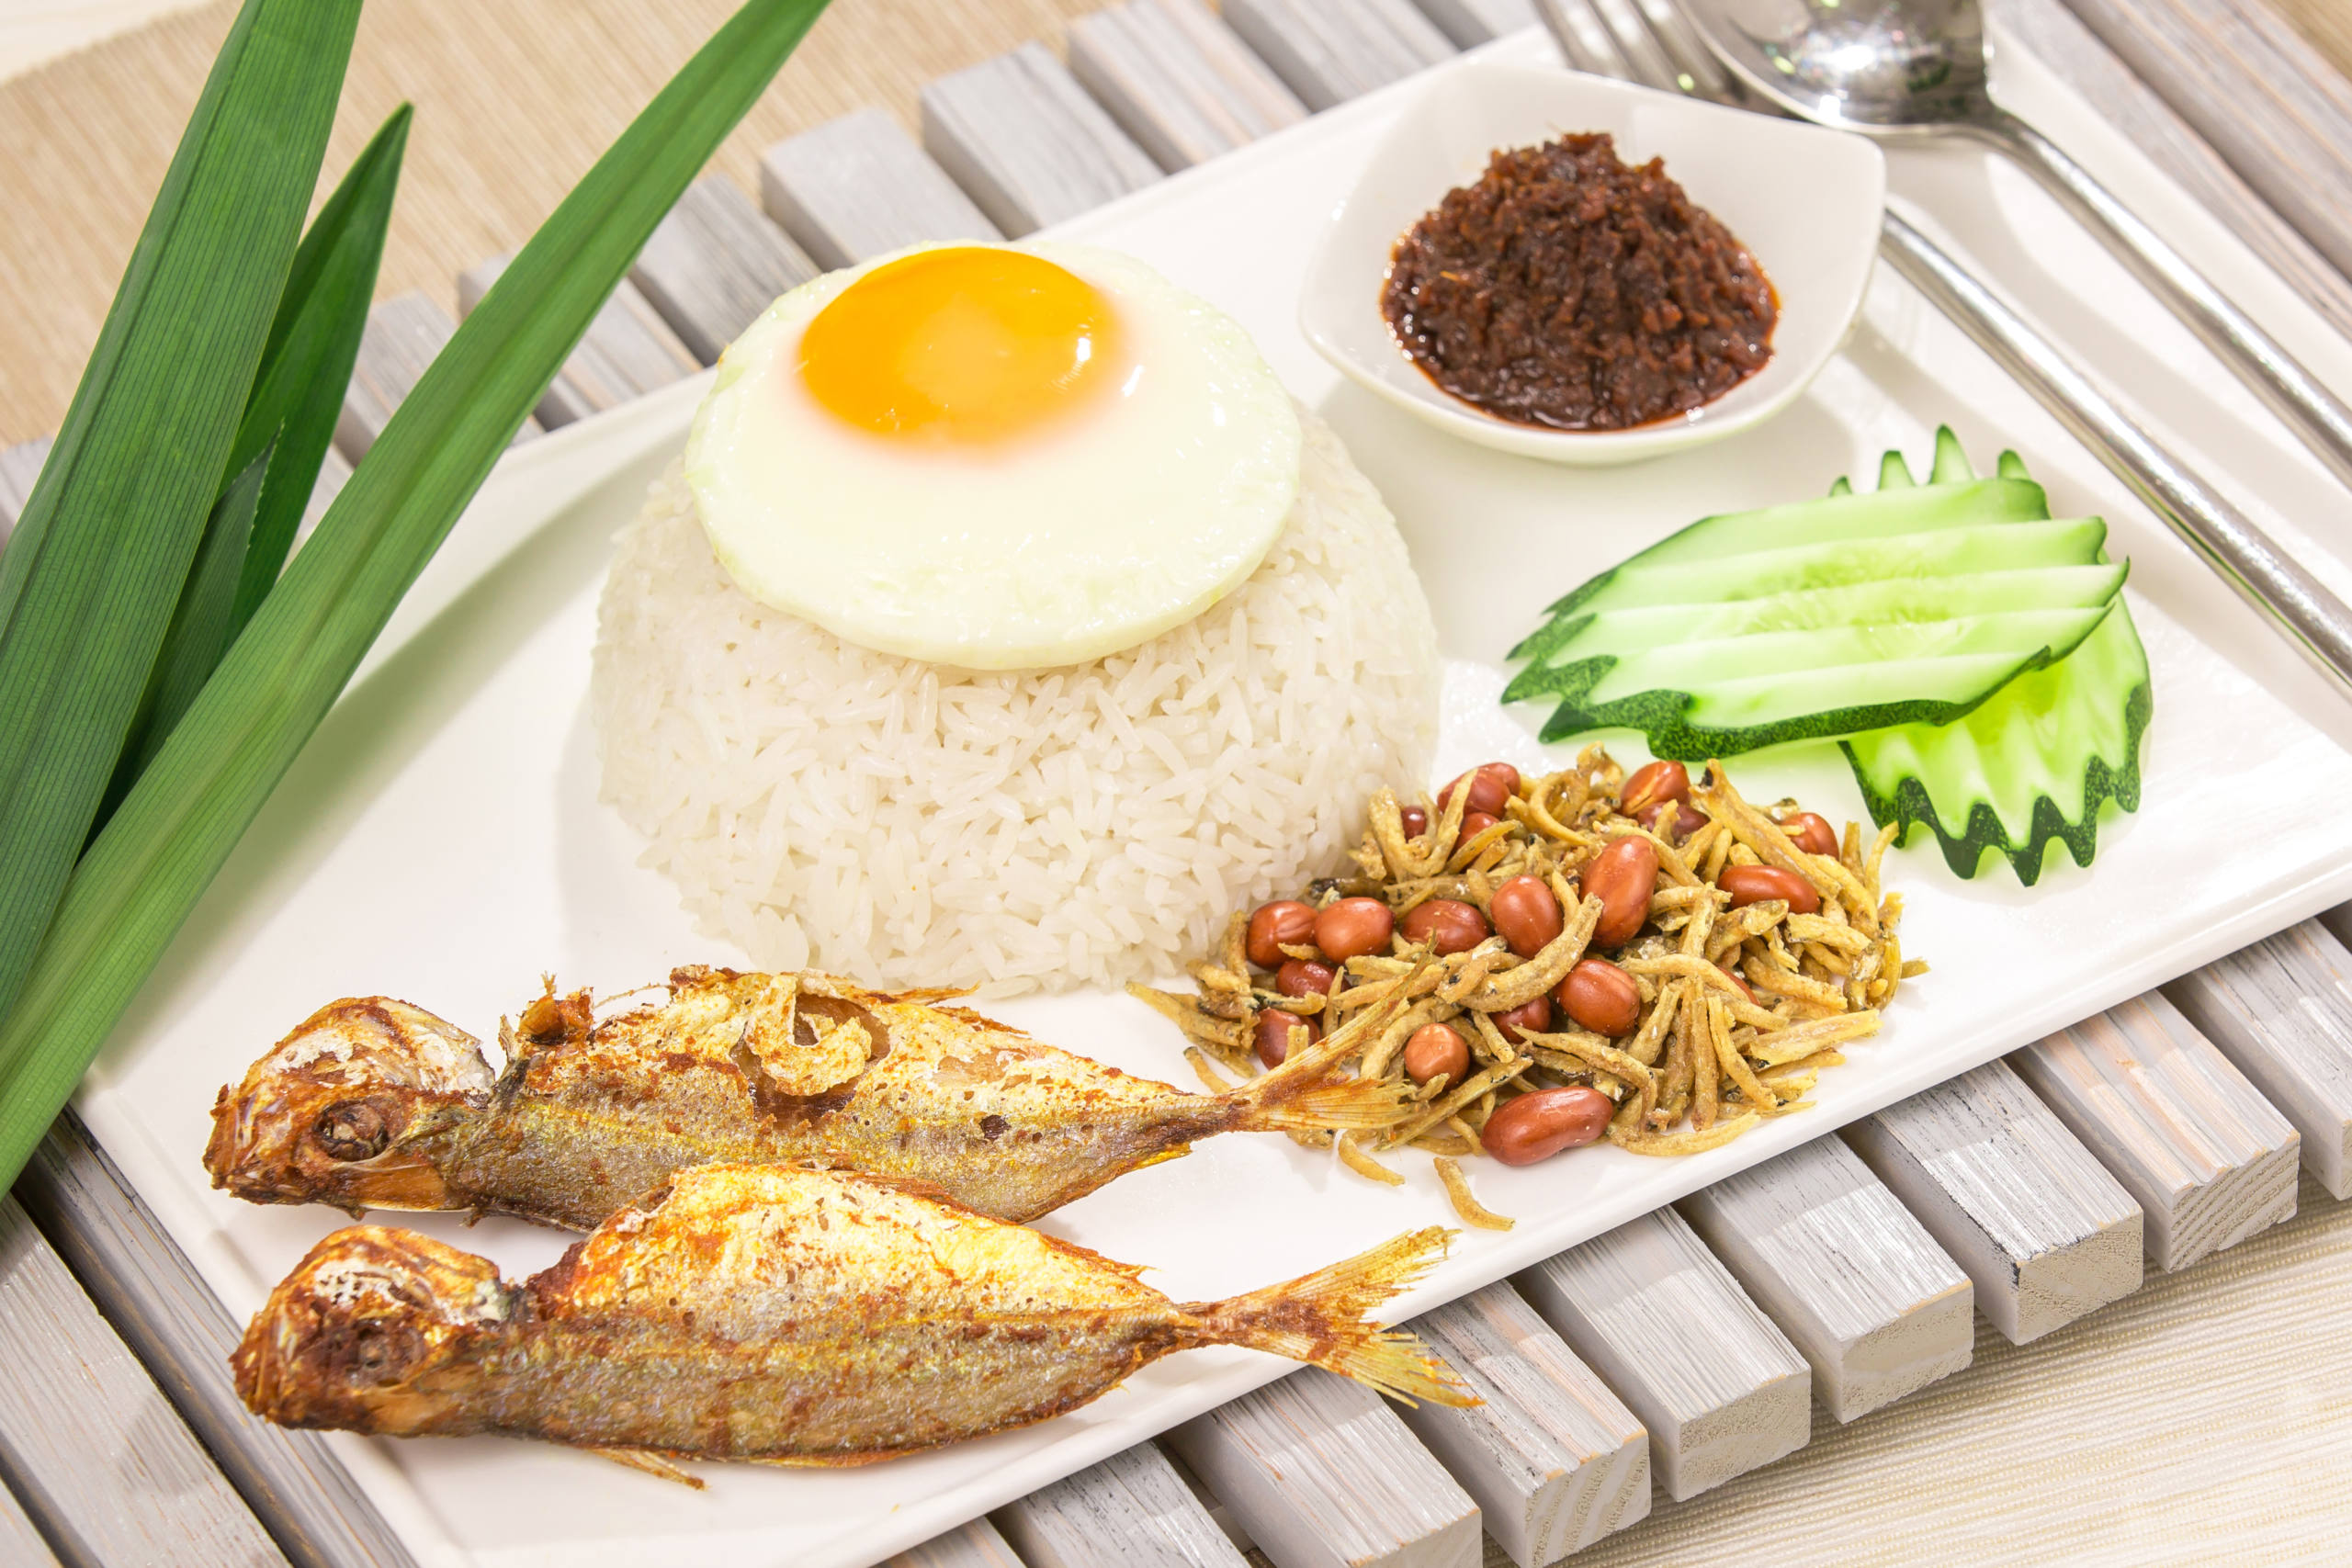 Double Fried Fish Set from Punggol Nasi Lemak. Delivered islandwide in Singapore powered by Oddle.